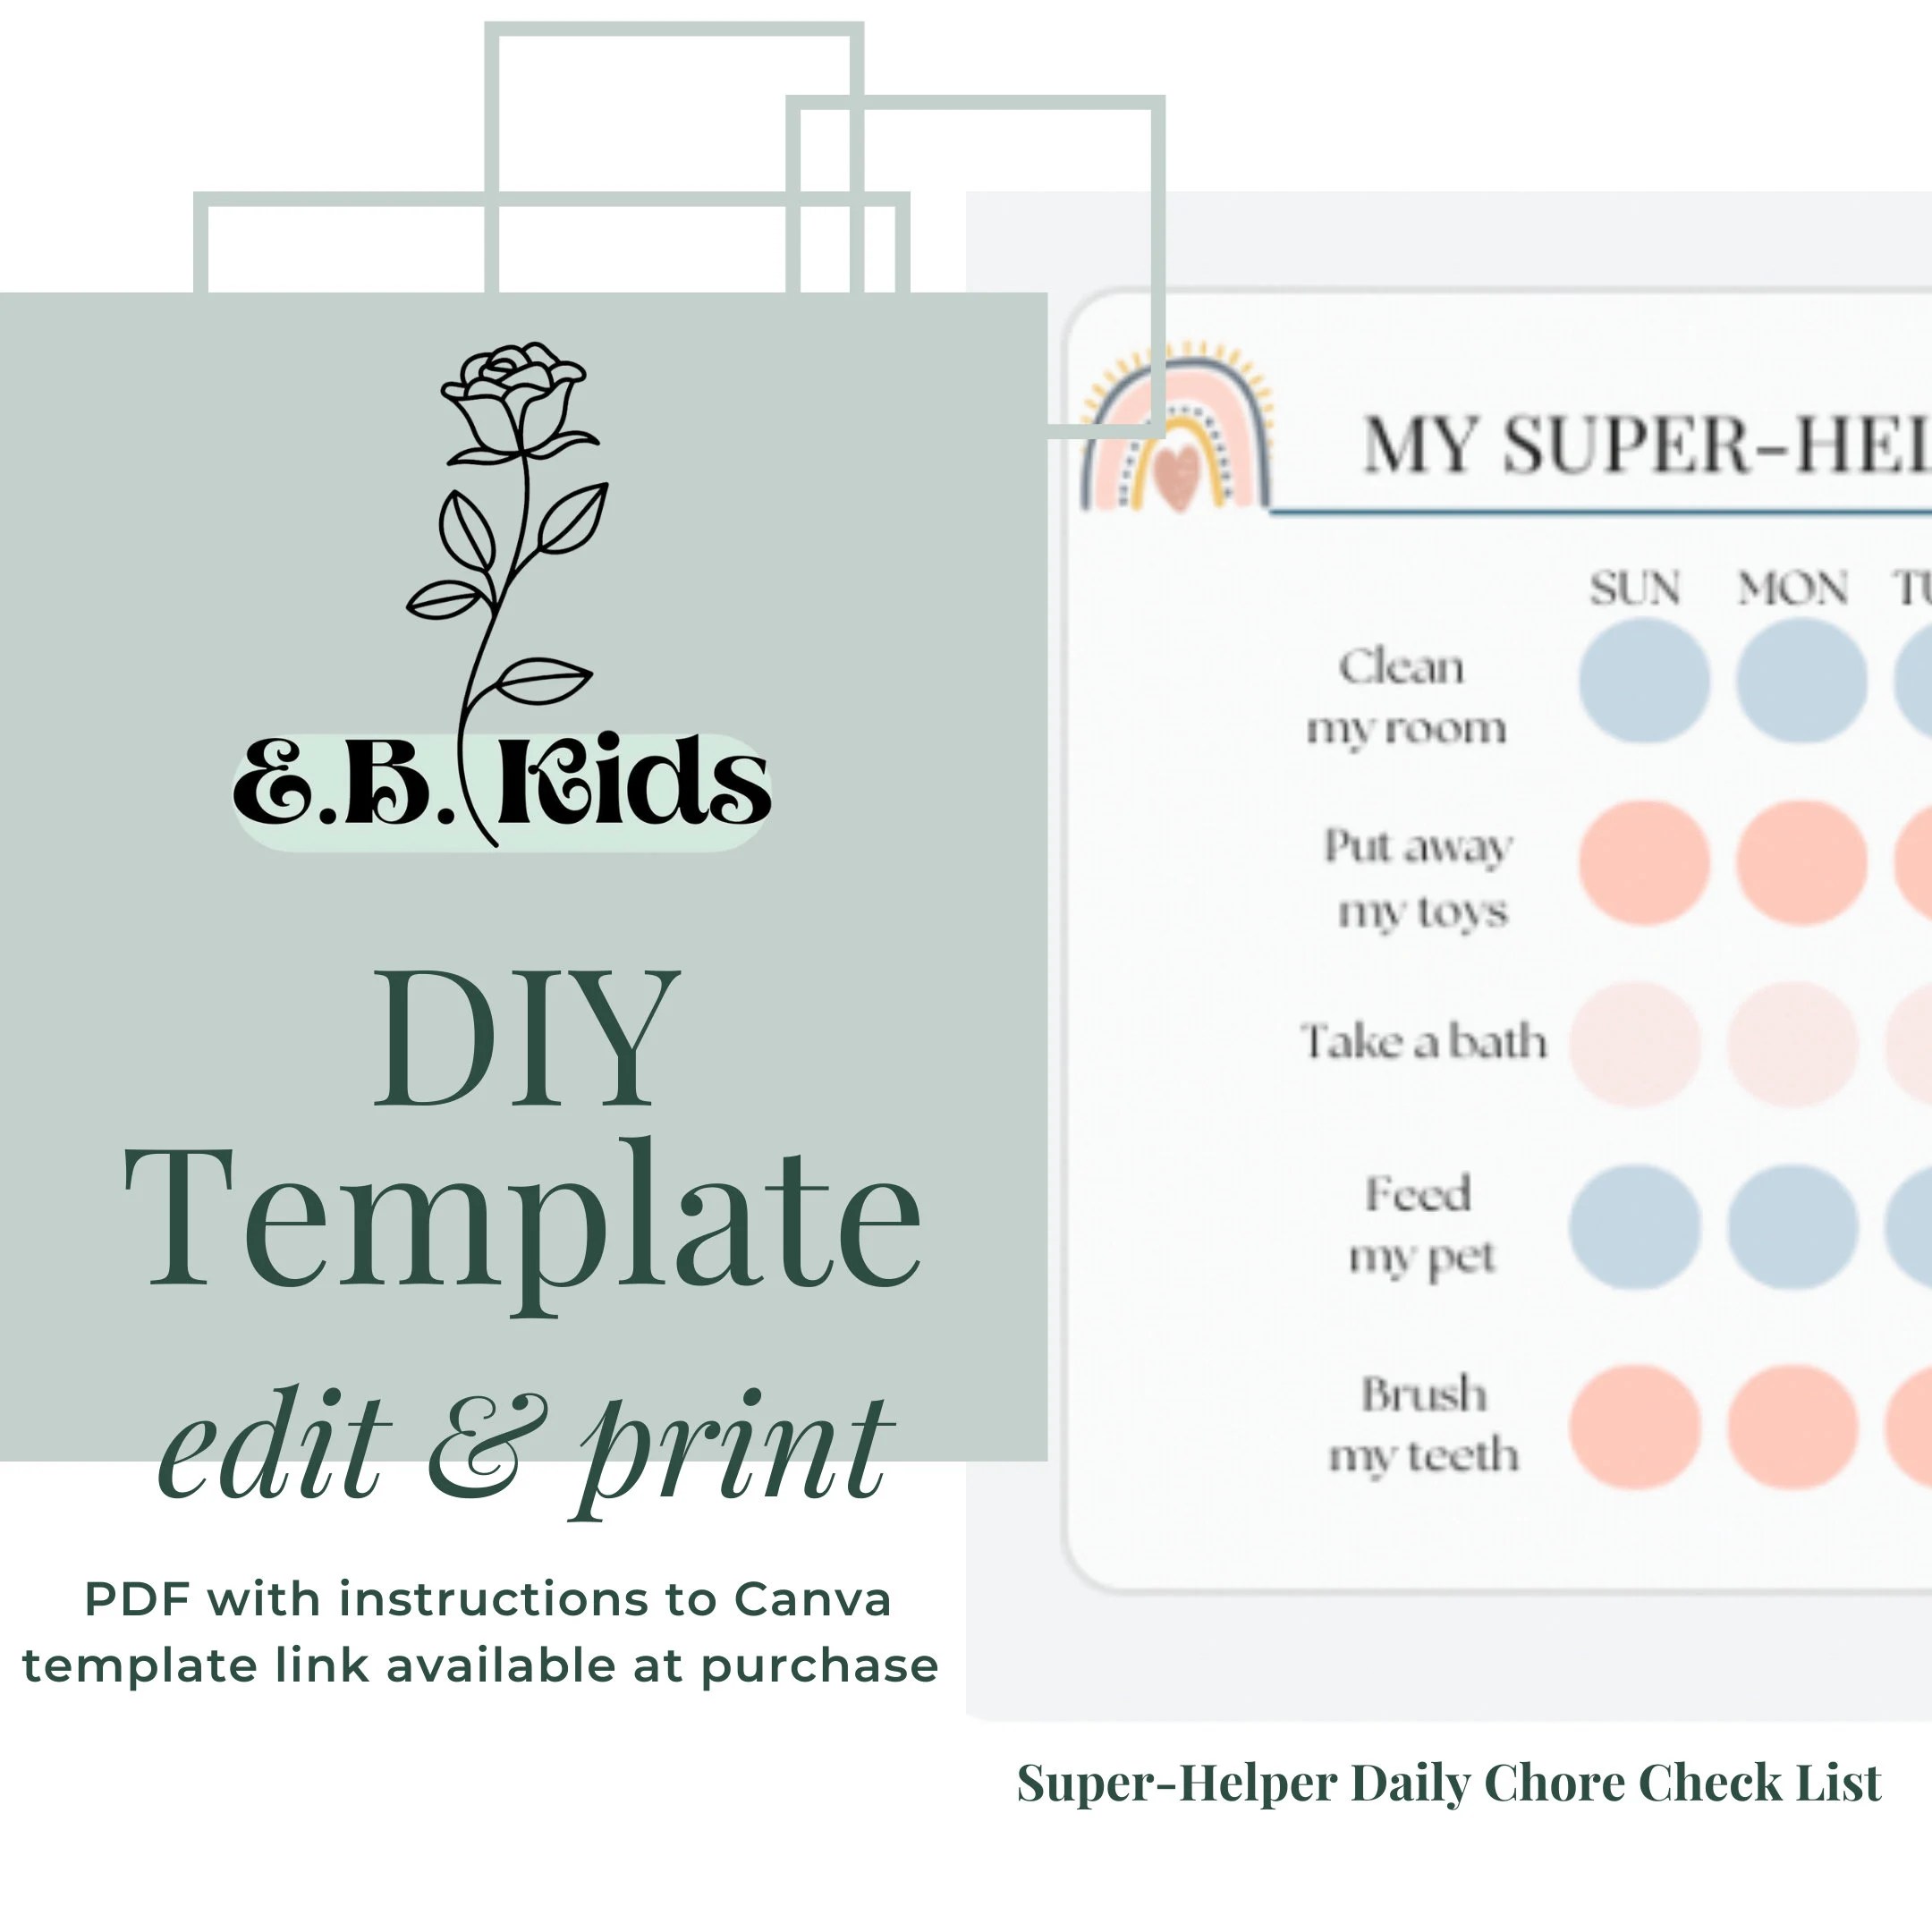 CUSTOMIZABLE Daily Chore Chart, Canva Template Craft. Make It Your Own. Edit, Print it. Do It Yourself Download It Now.